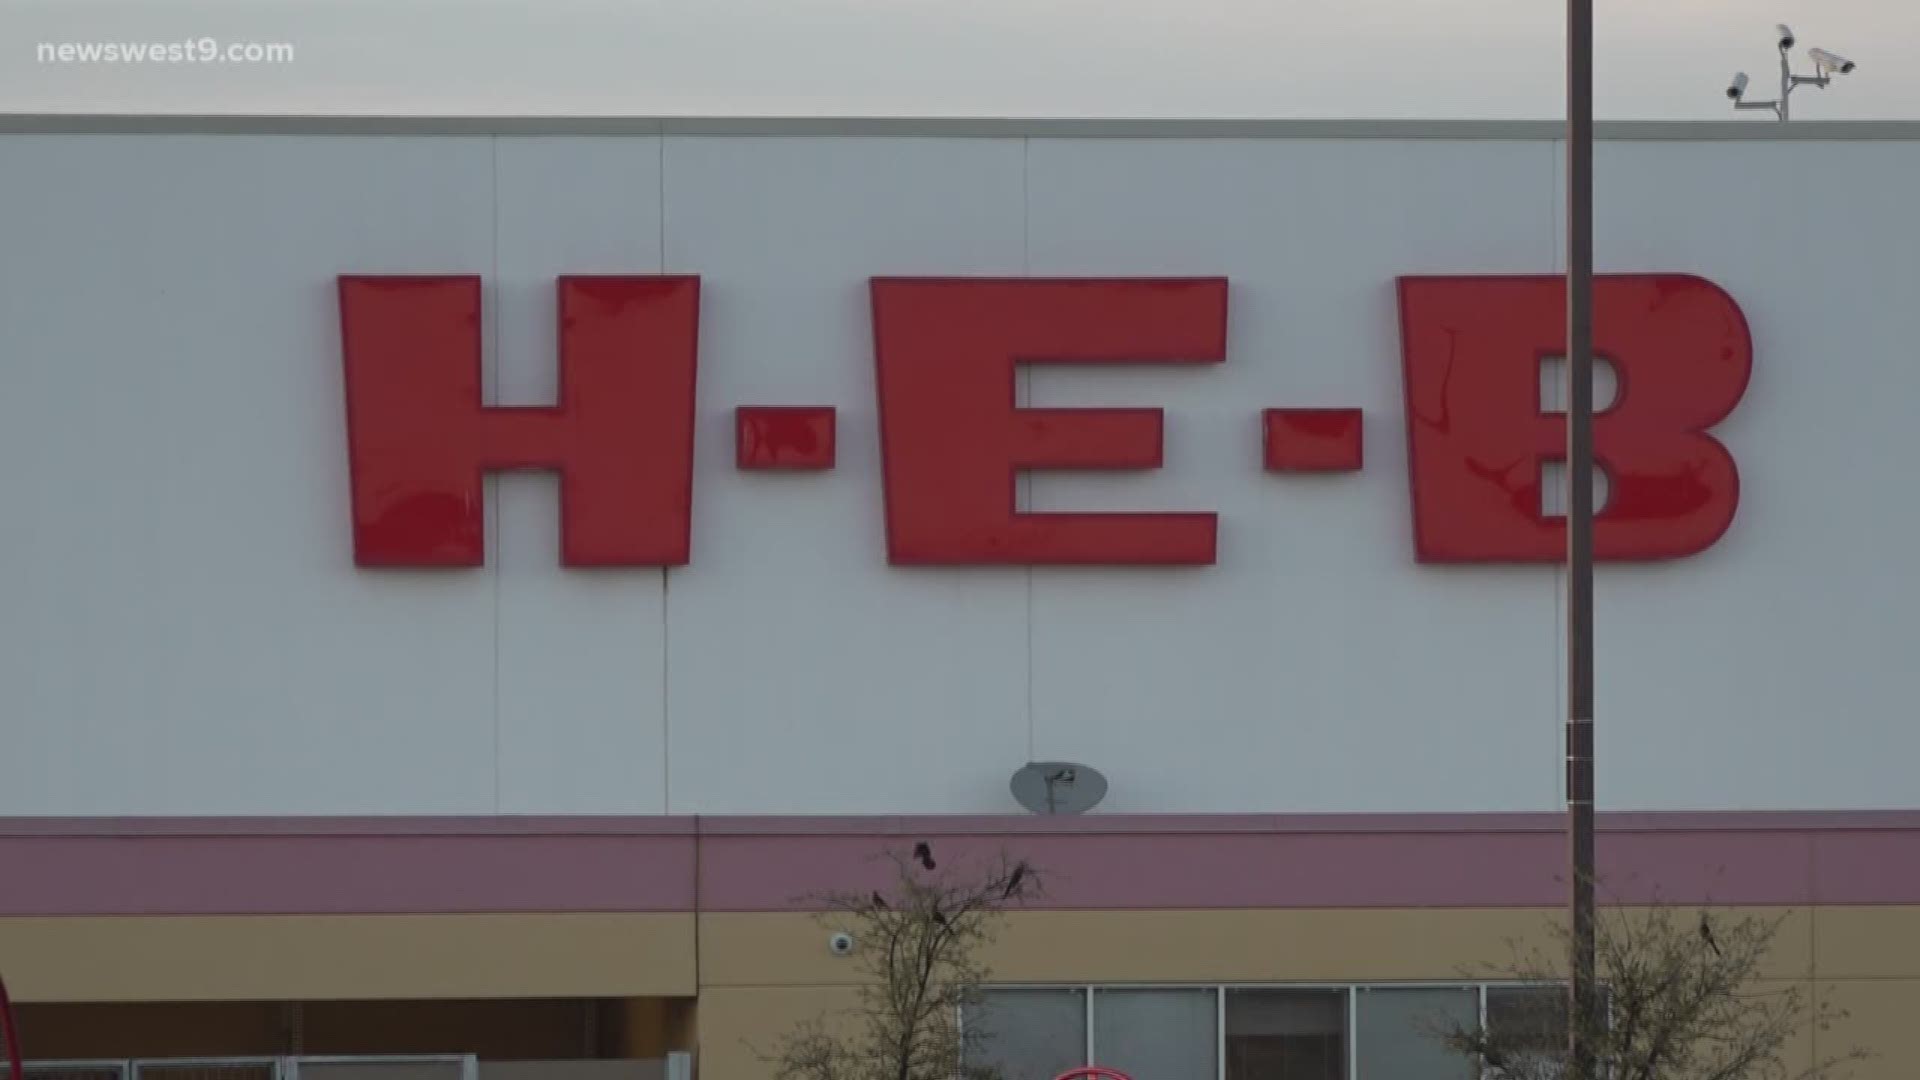 H-E-B says the person is no longer employed and the case is in the hands of local authorities